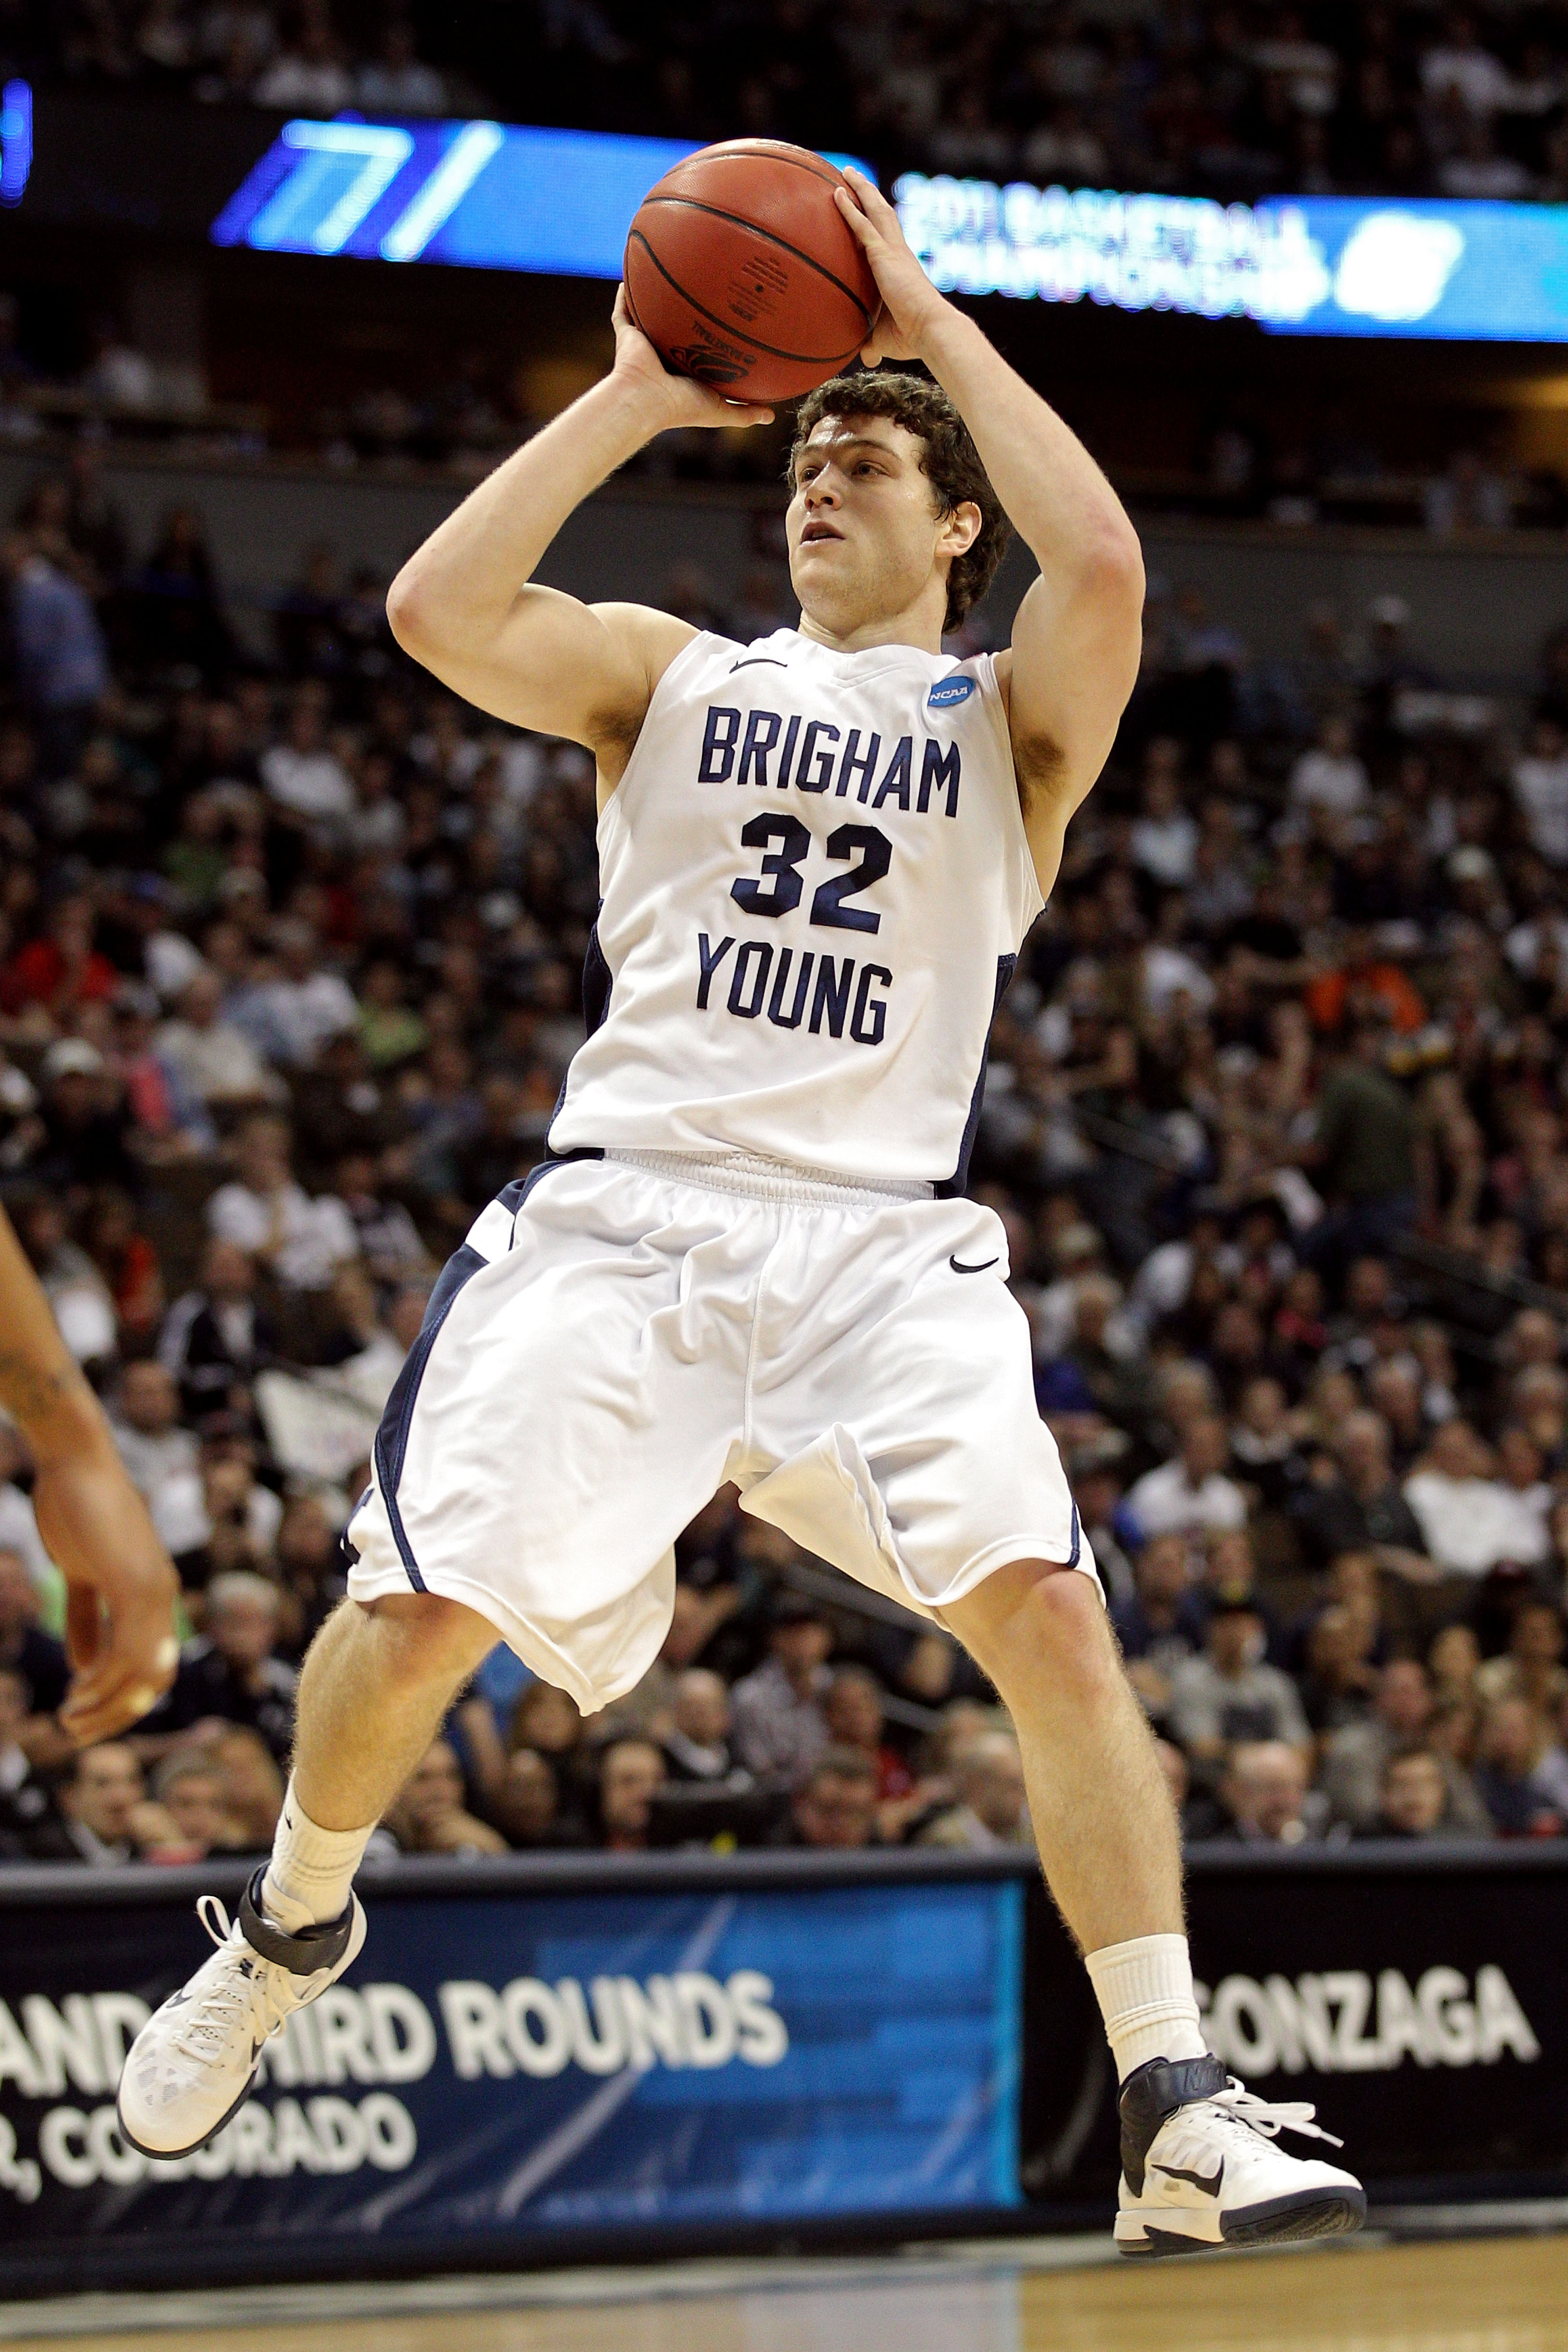 DENVER, CO - MARCH 19:  Jimmer Fredette #32 of the Brigham Young Cougars shoot against the Gonzaga Bulldogs during the third round of the 2011 NCAA men's basketball tournament at Pepsi Center on March 19, 2011 in Denver, Colorado.  (Photo by Justin Edmond